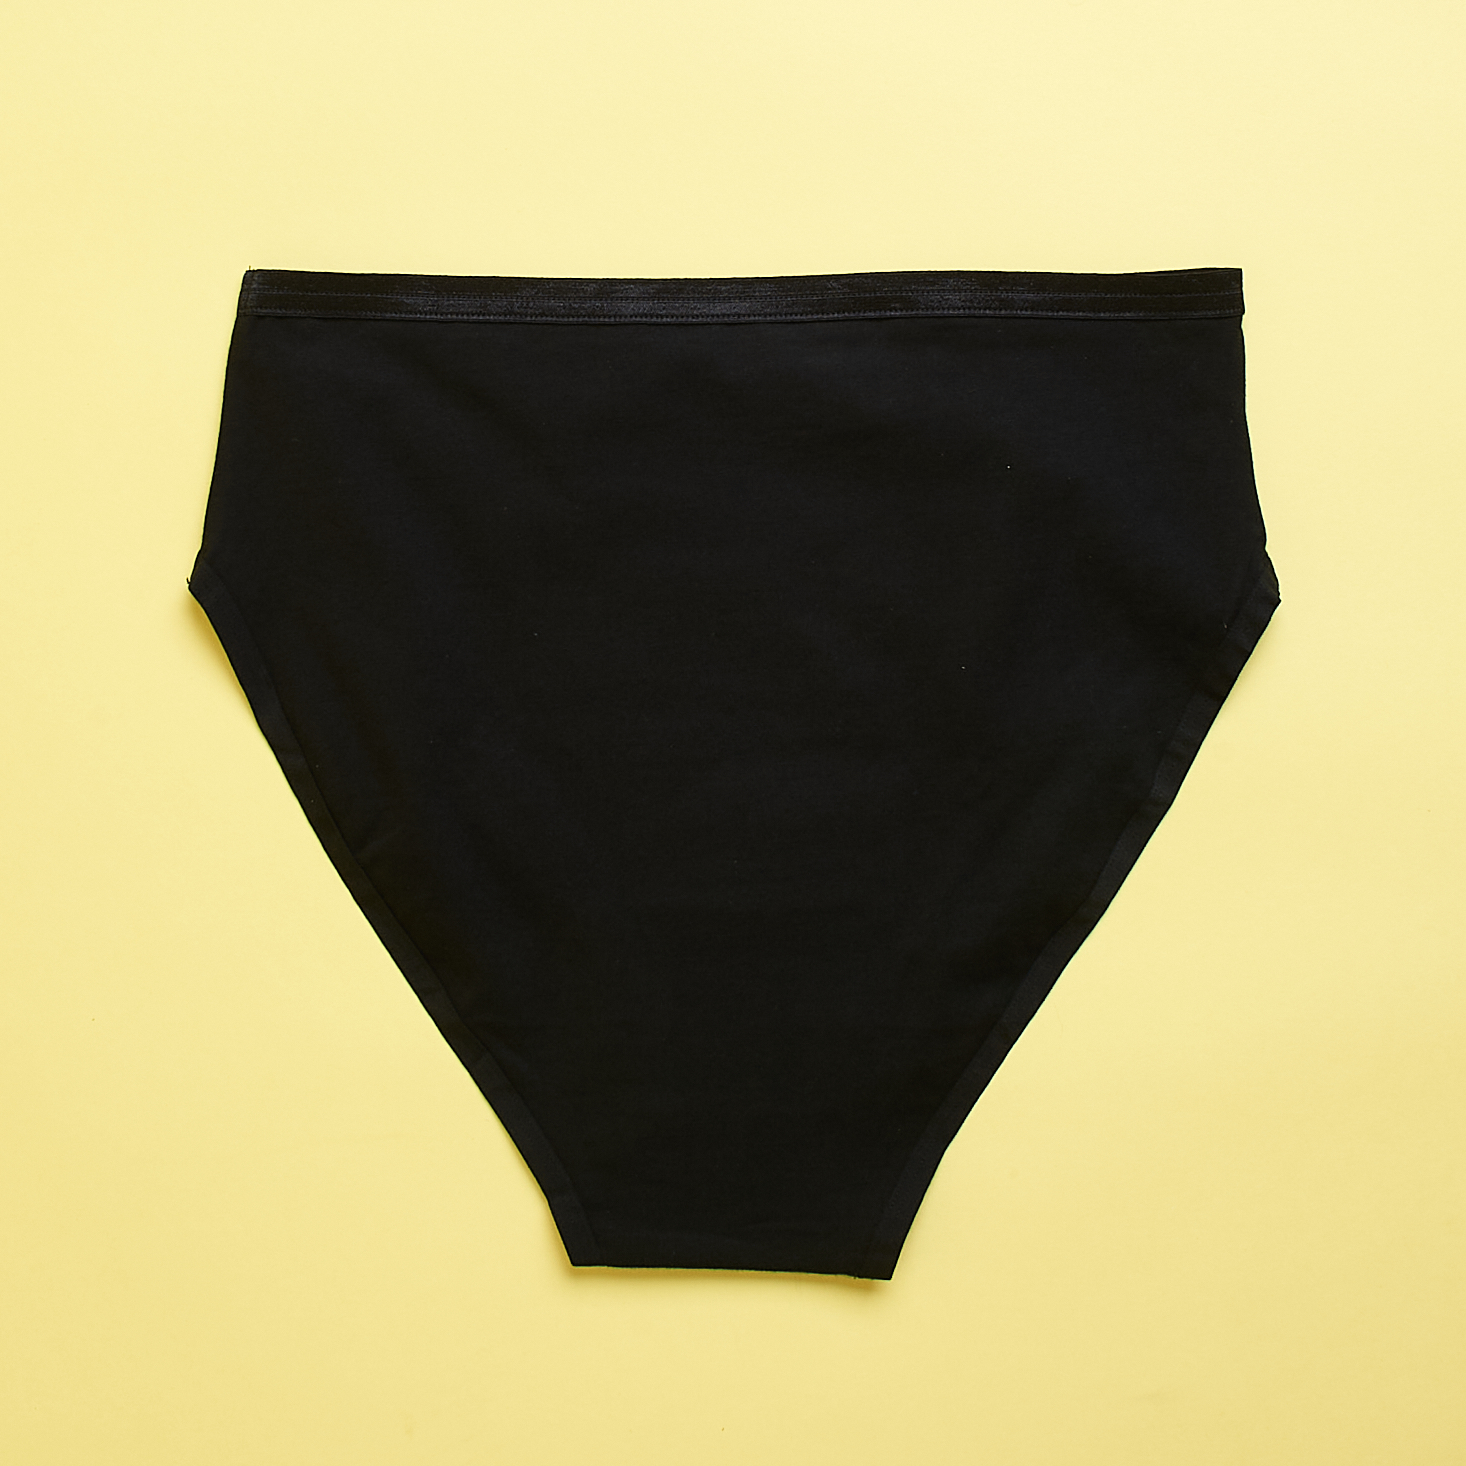 Startup Knickey Is Improving the Business of Women's Underwear